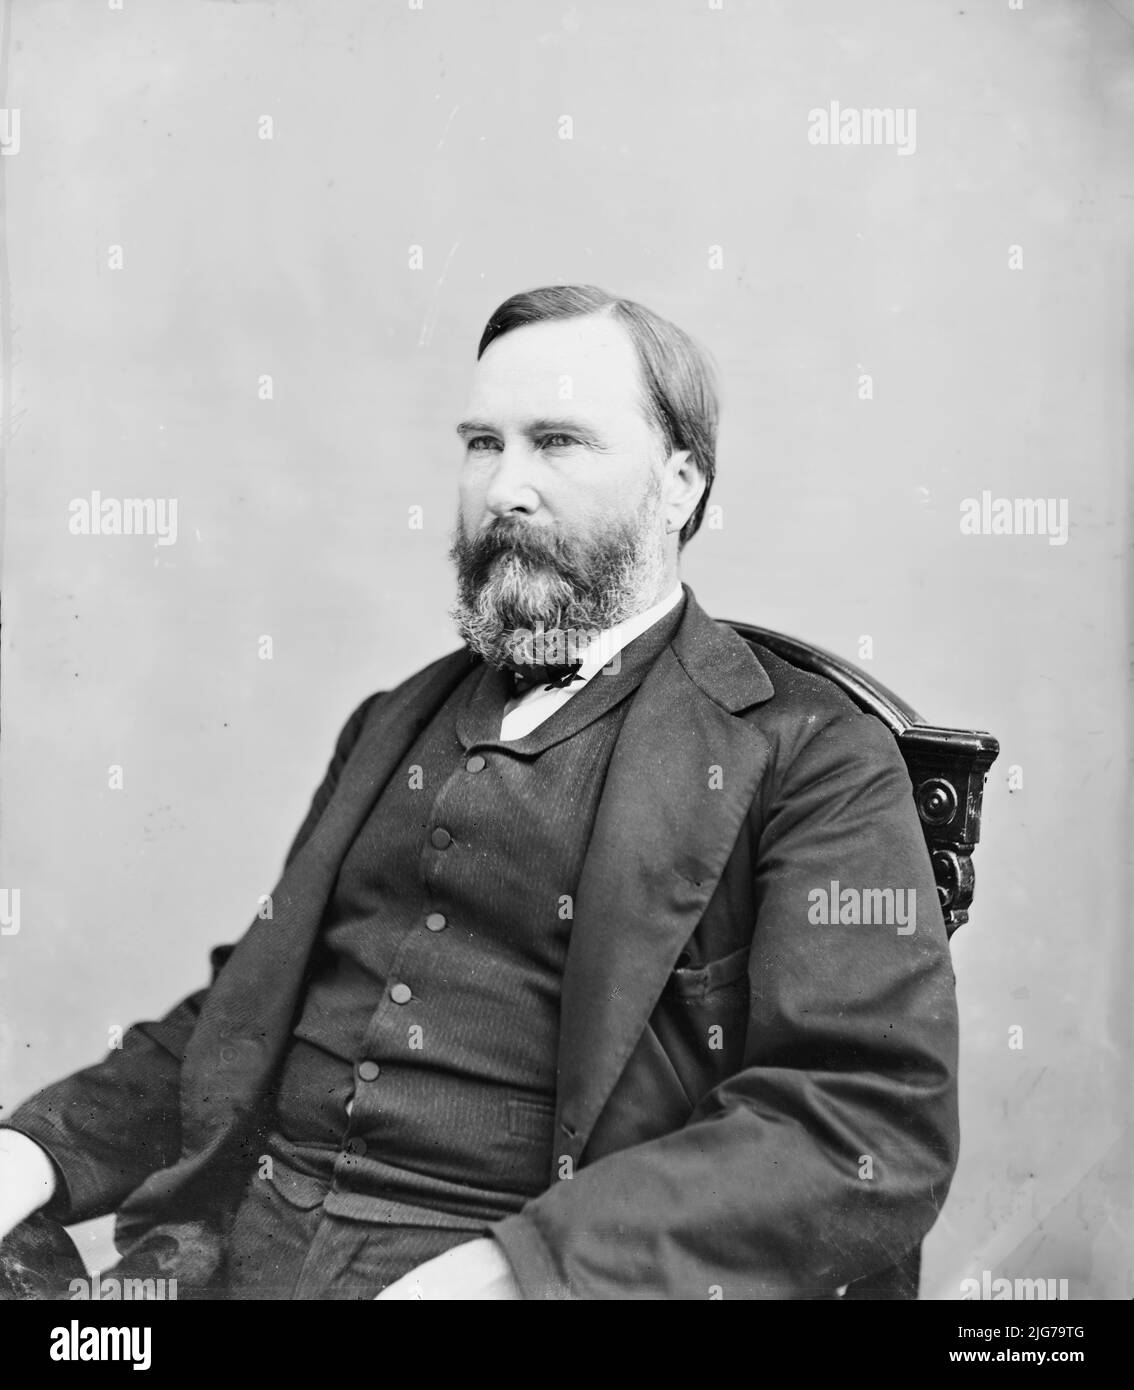 Longstreet, Gen. C.S.A. [Confederate States Army], between 1865 and 1880. [Confederate general during the American Civil War; principal subordinate to General Robert E. Lee]. Stock Photo